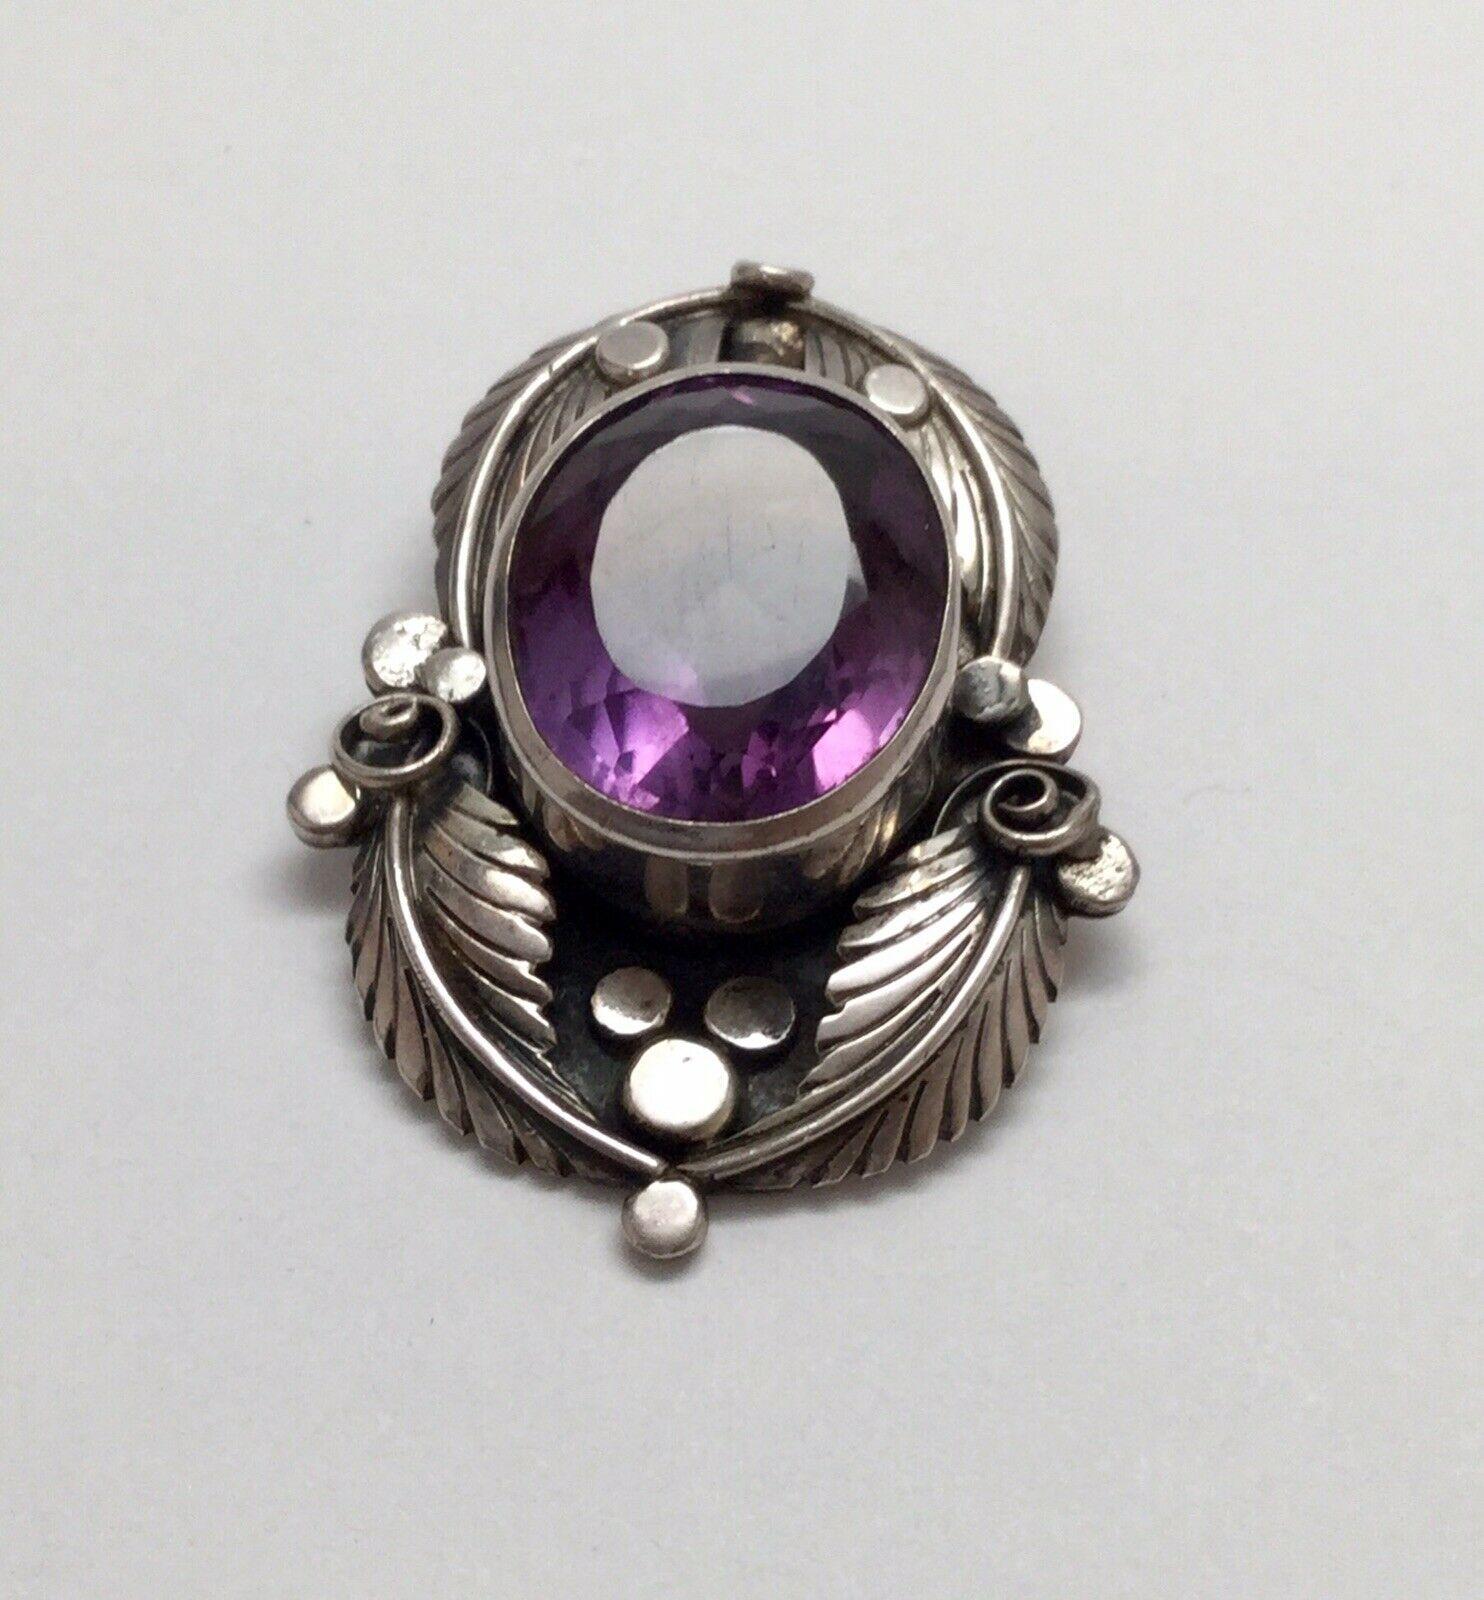 Native American E. Billy Sterling silver amethyst double bale pendant.

Marked: E. Billy, Sterling

Measures: 2